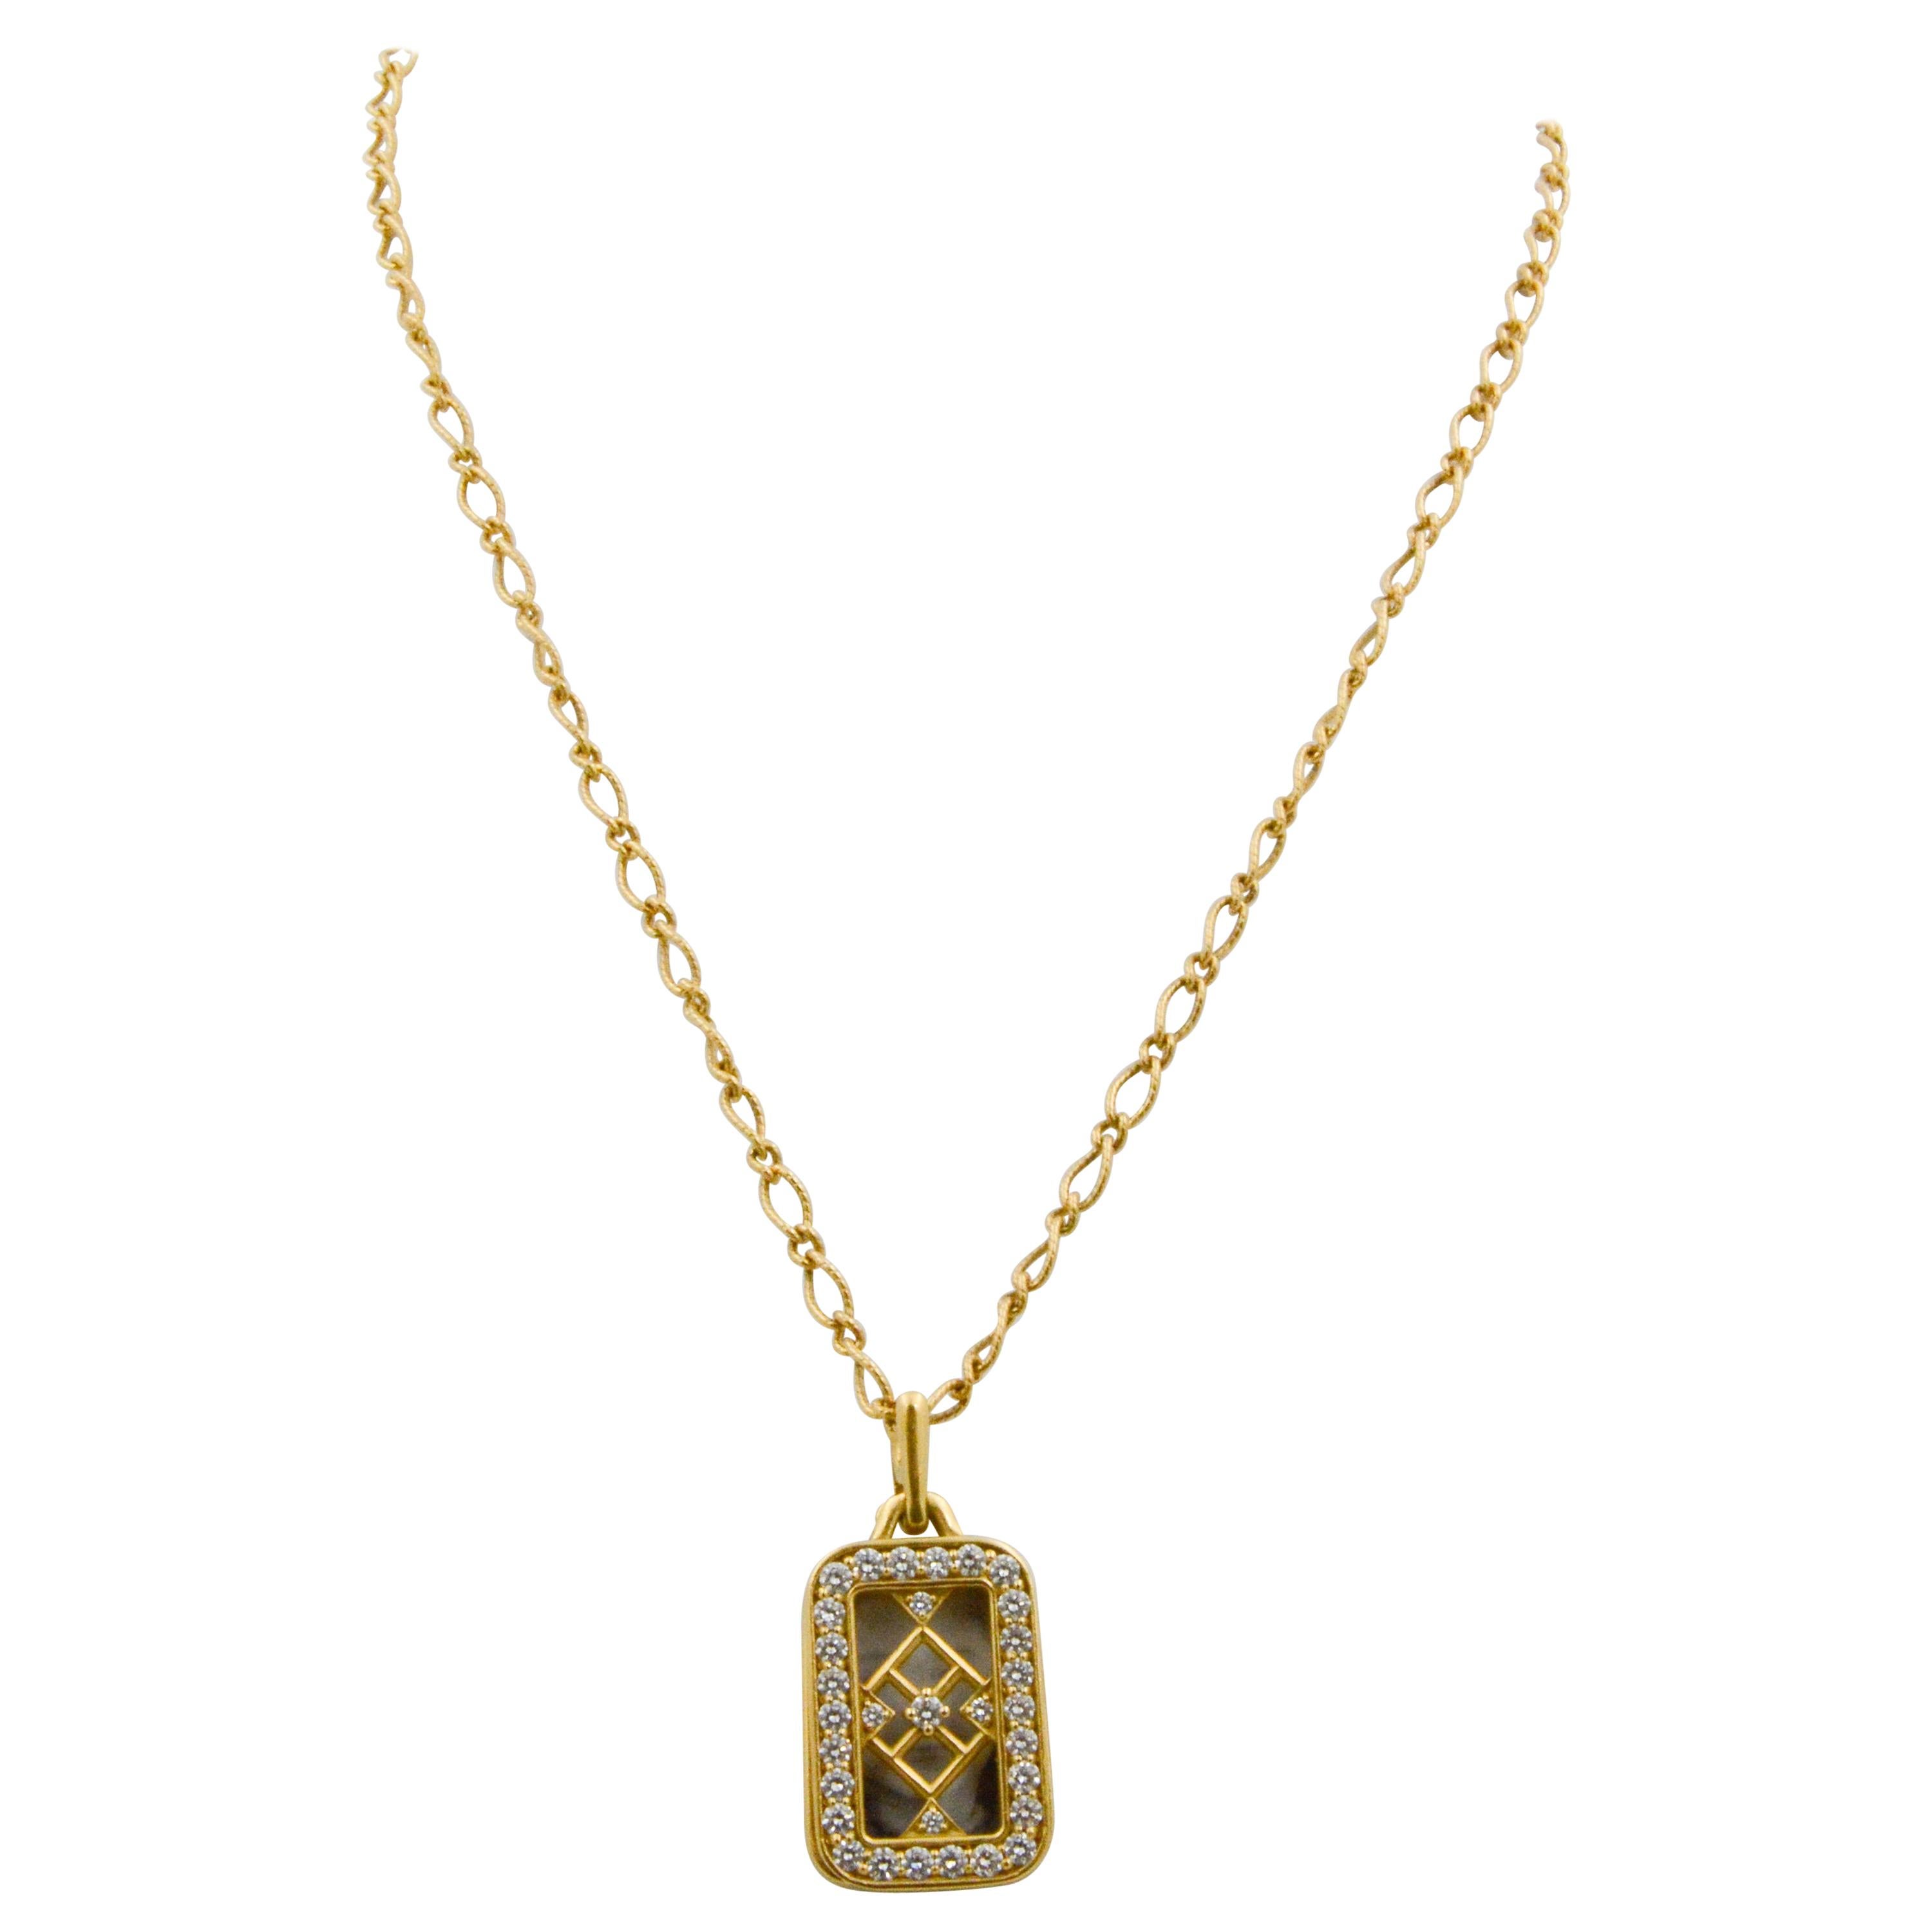 This Monica Rich Kosann 18k yellow gold pendant has three moving rectangular panels. The front panel has graphic open design, adorned with round brilliant cut diamonds, 1.43ctw G-H color and VS clarity and 18k yellow gold. The other pendant panels